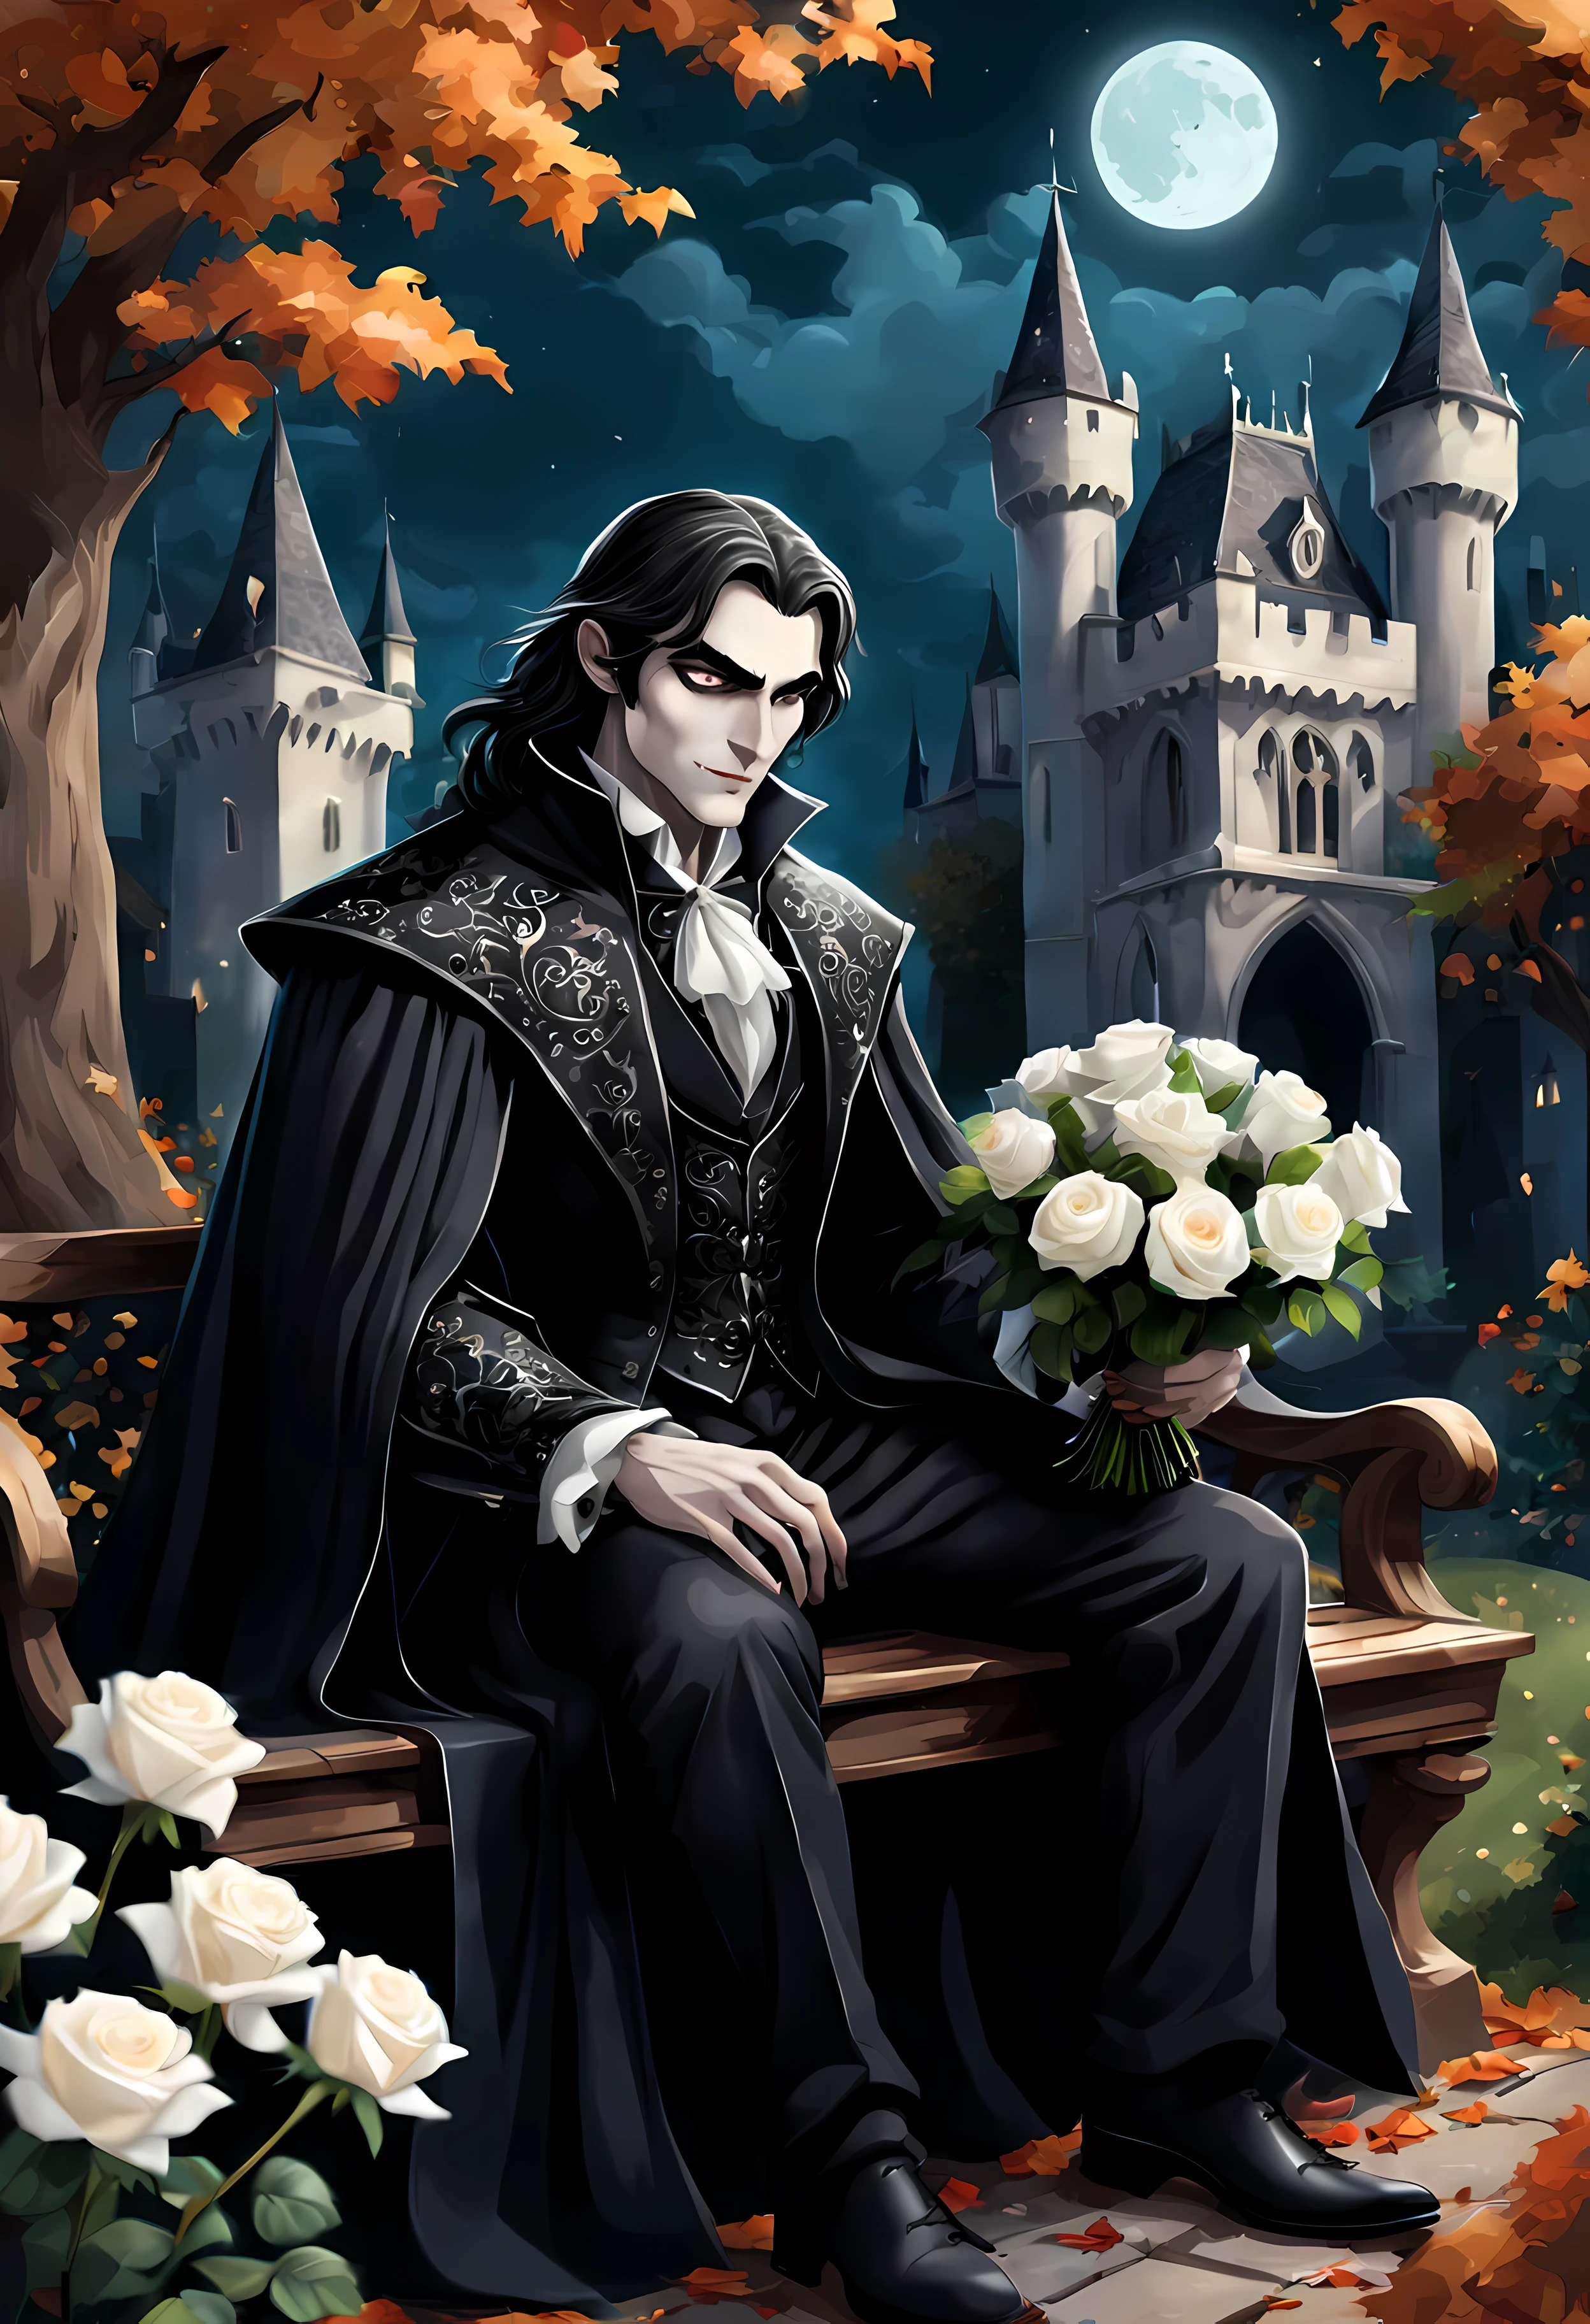 Perfect HAnds, mAsterpiece in mAximum 16K resolution, (cute cArtoon style:1.3), A (((獨自的))) ((特寫)) of A hAndsome vAmpire (mAle) sitting on An elegAnt bench in A moonlit Autumn gArden, ((complex rich gothic pAtterns)), the vAmpire is weAring An elegAnt flowing gown, he hAs (生動的綠色眼睛), And long blAck hAir, ((holding A bouquet of white roses in his hAnds)), gothic cAstle in the bAckground. | ((更多的_DetAil))